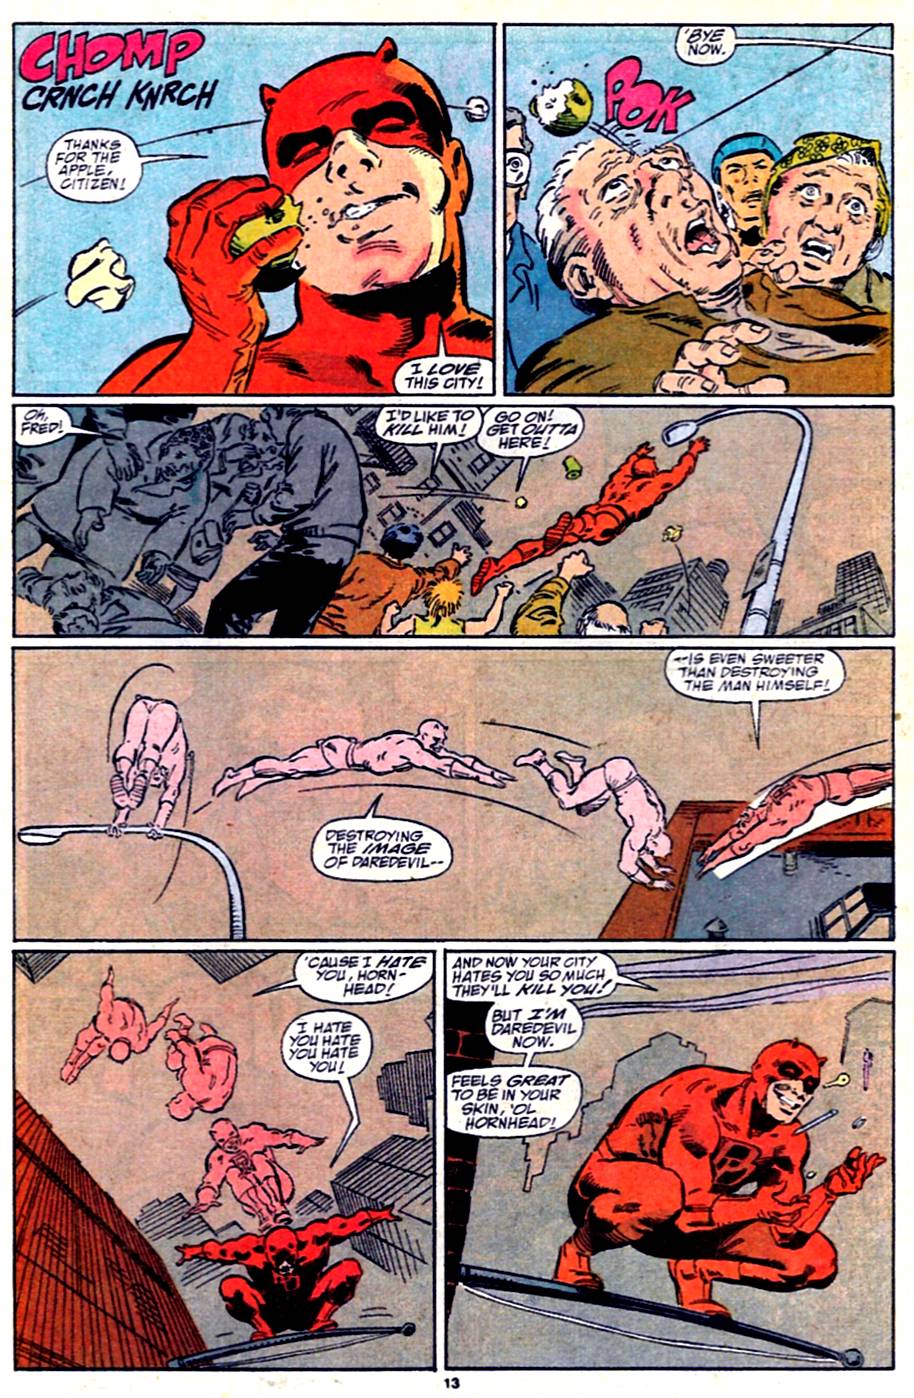 Bullseye does his best impression of The Man Without Fear in Daredevil Vol. 1 #290 "Bullseye!" (1991), Marvel Comics. Words by Ann Nocenti, art by Kieron Dwyer, Fred Fredricks, and Steve Buccellato.